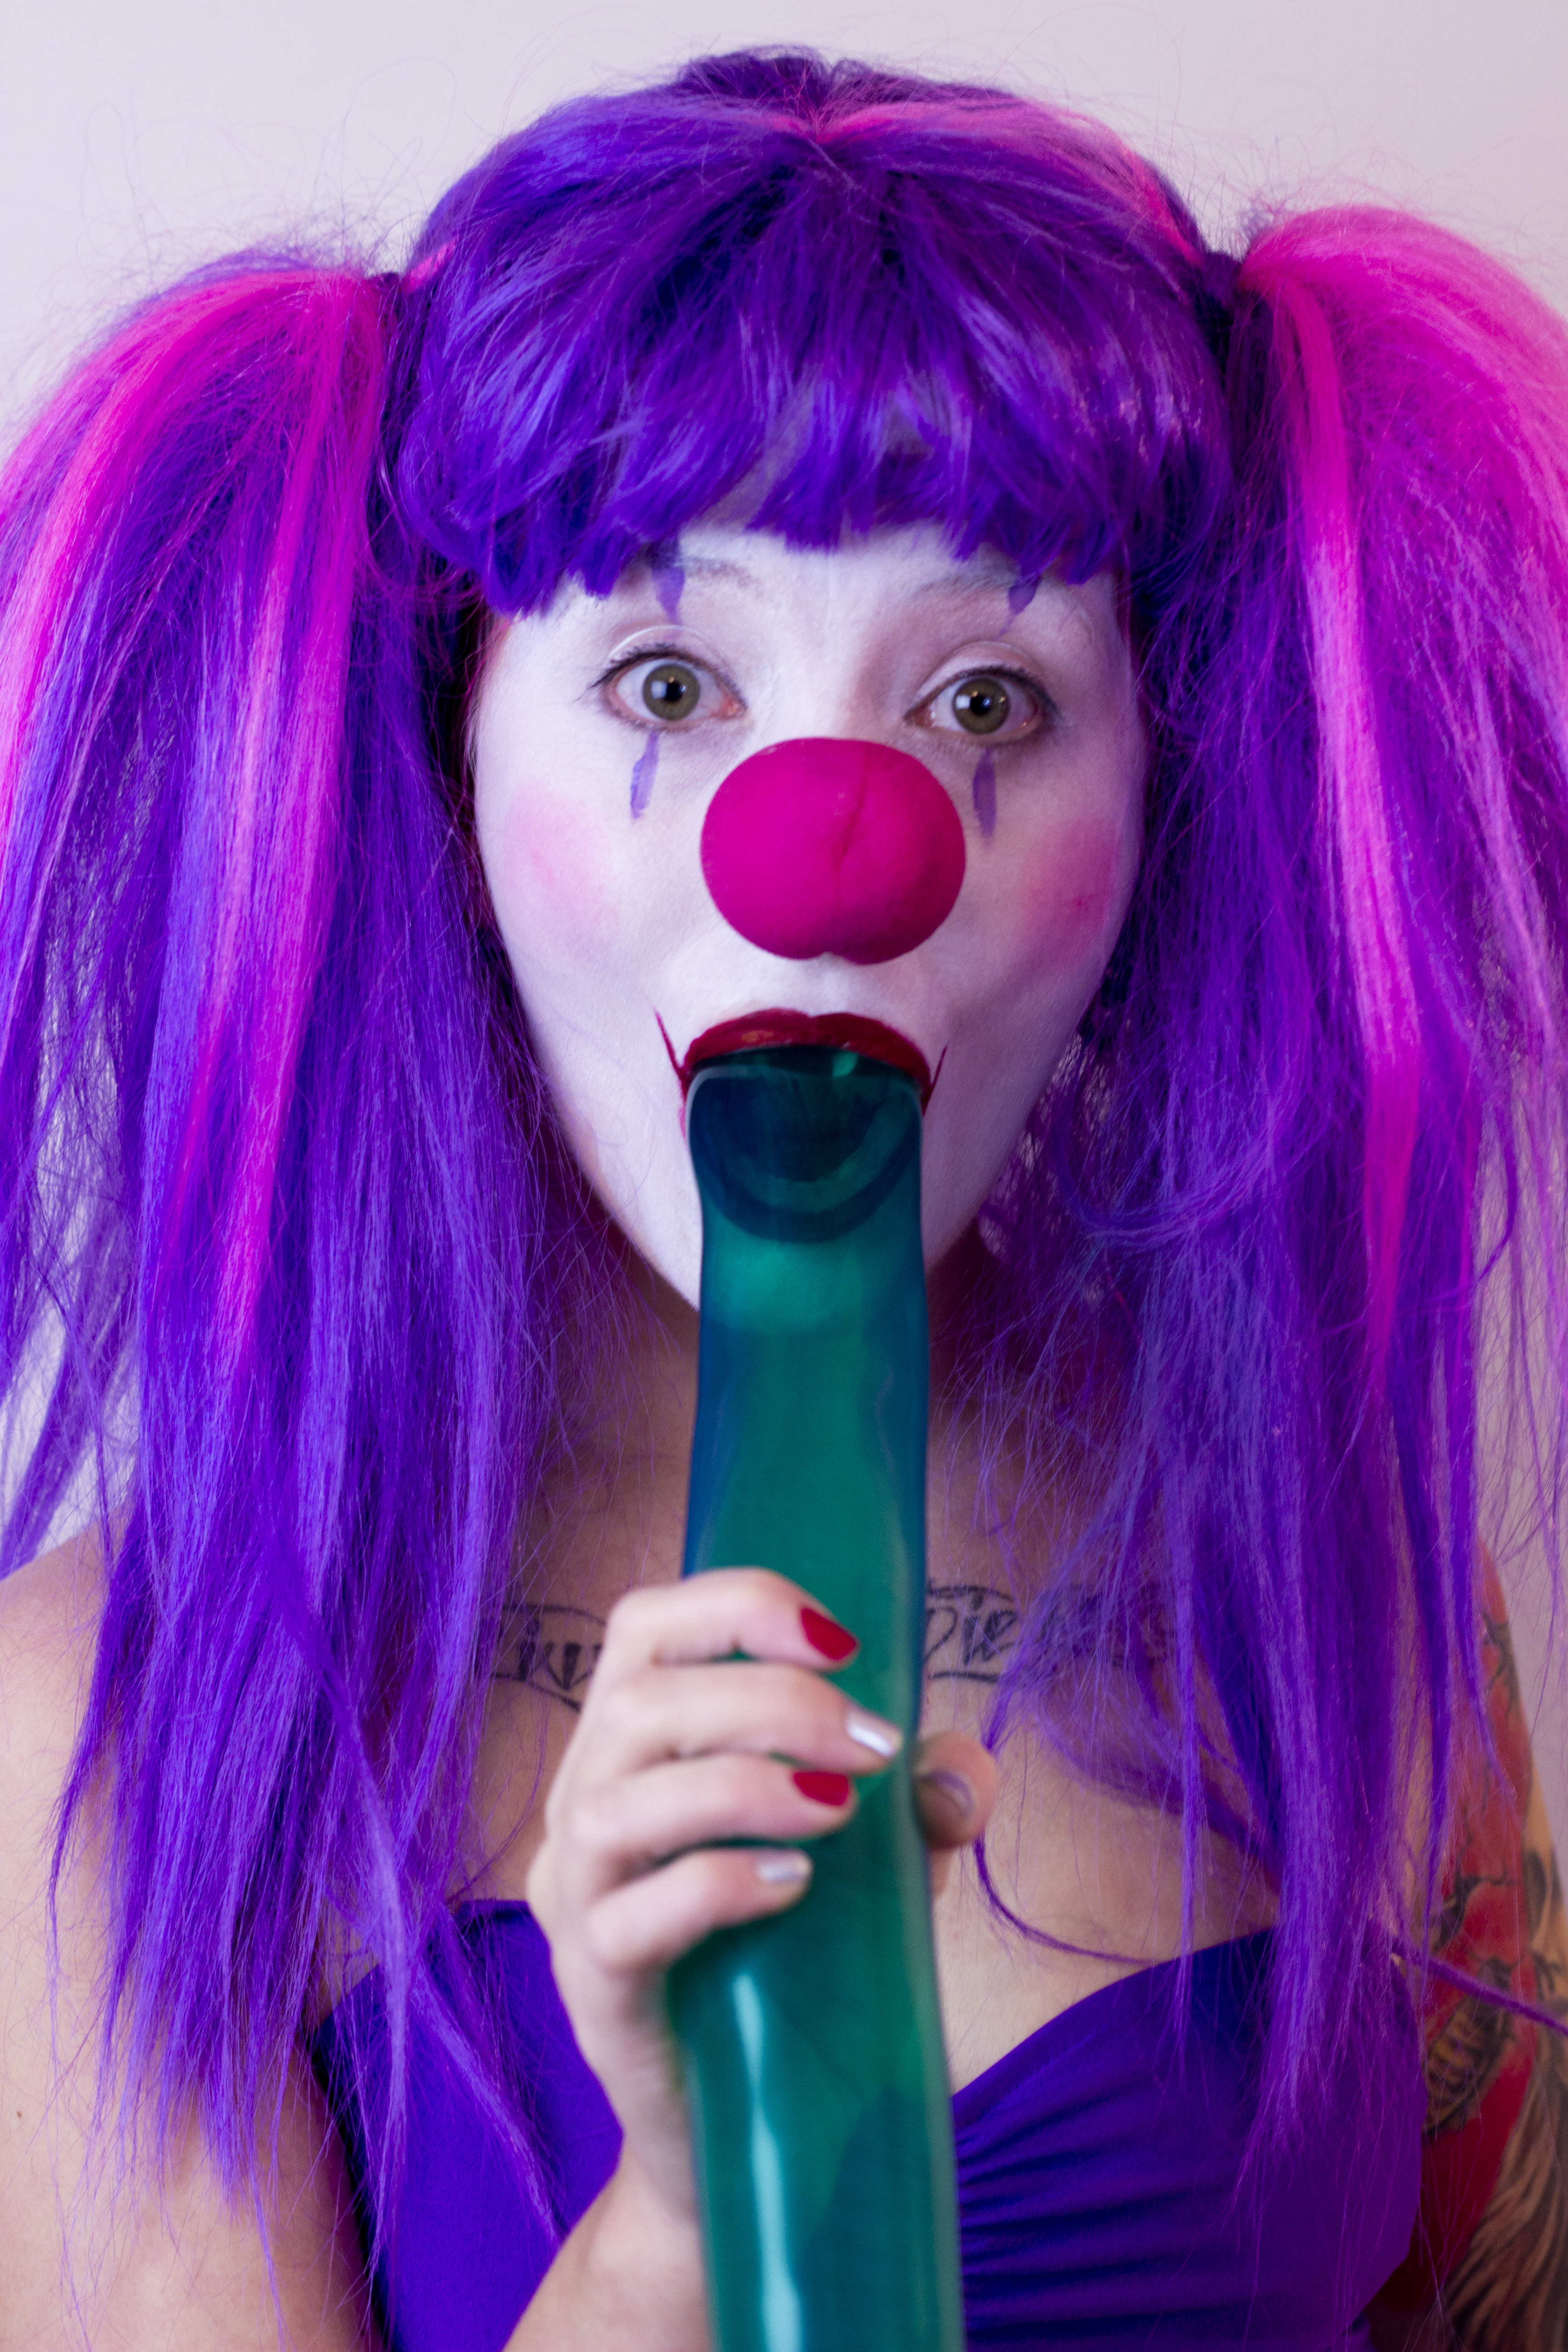 Demand For Creepy Clown Porn Has Skyrocketed And You Should All Be Ashamed Of Yourselves